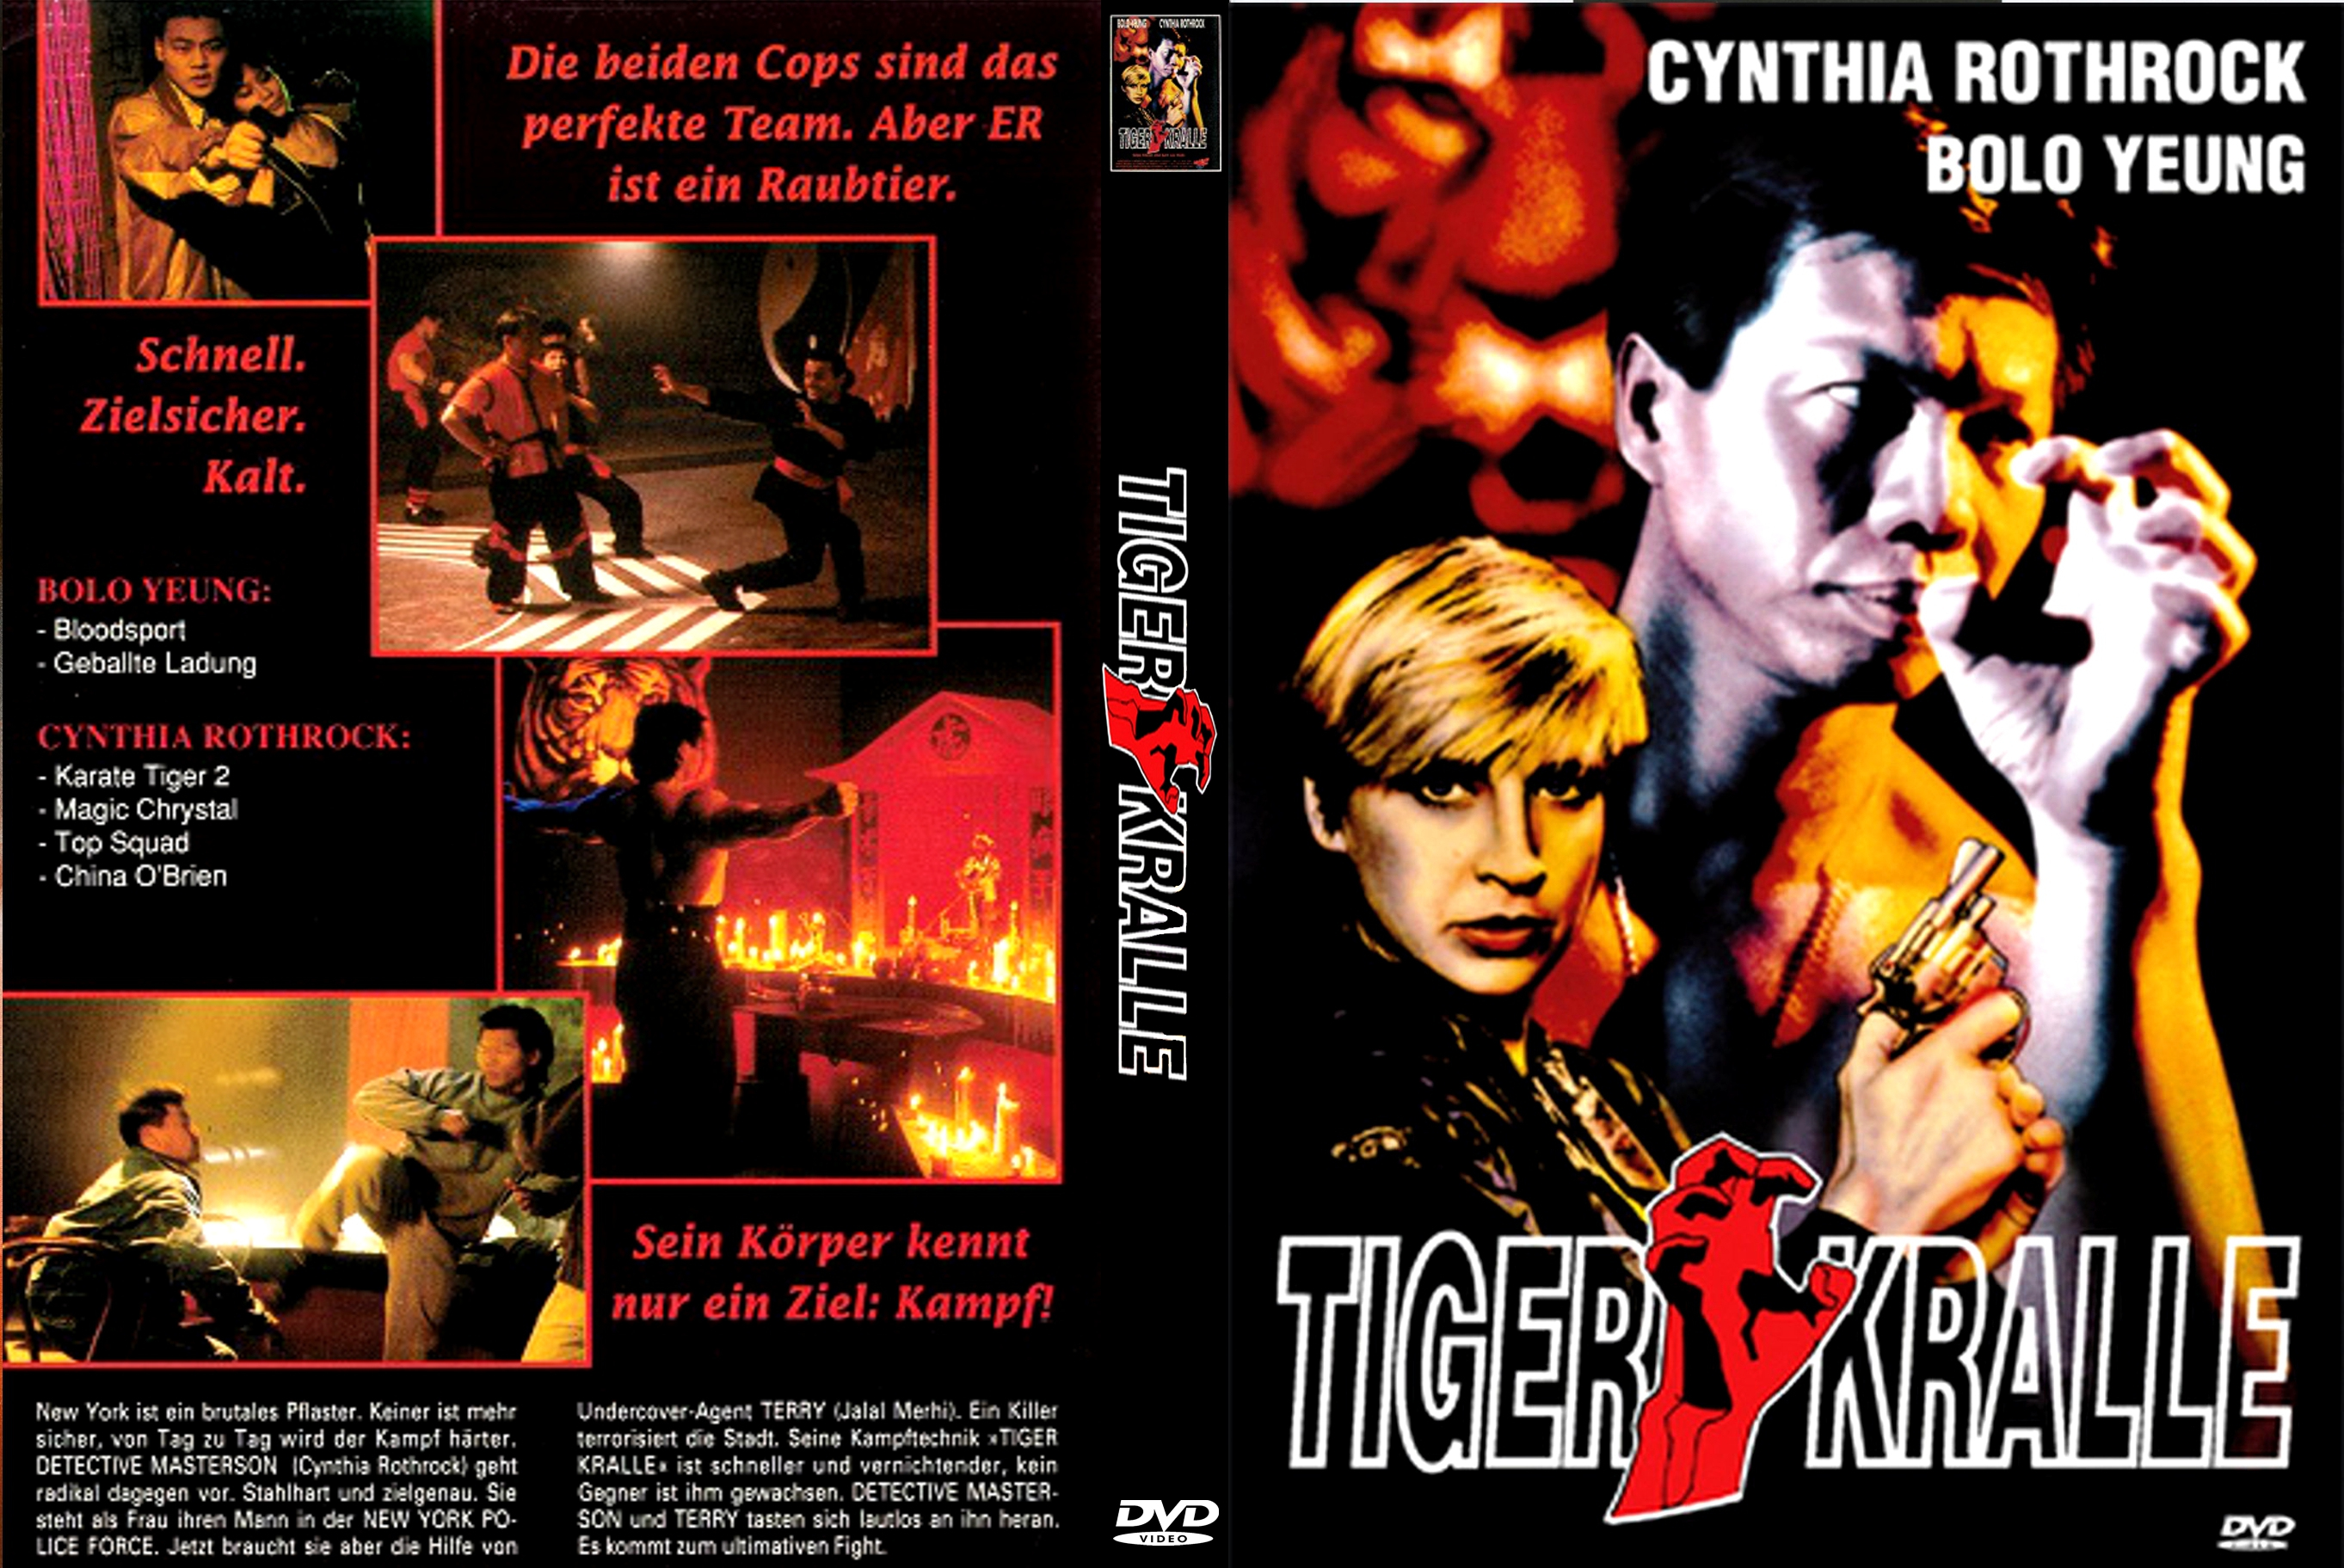 Tiger Claws (1991)